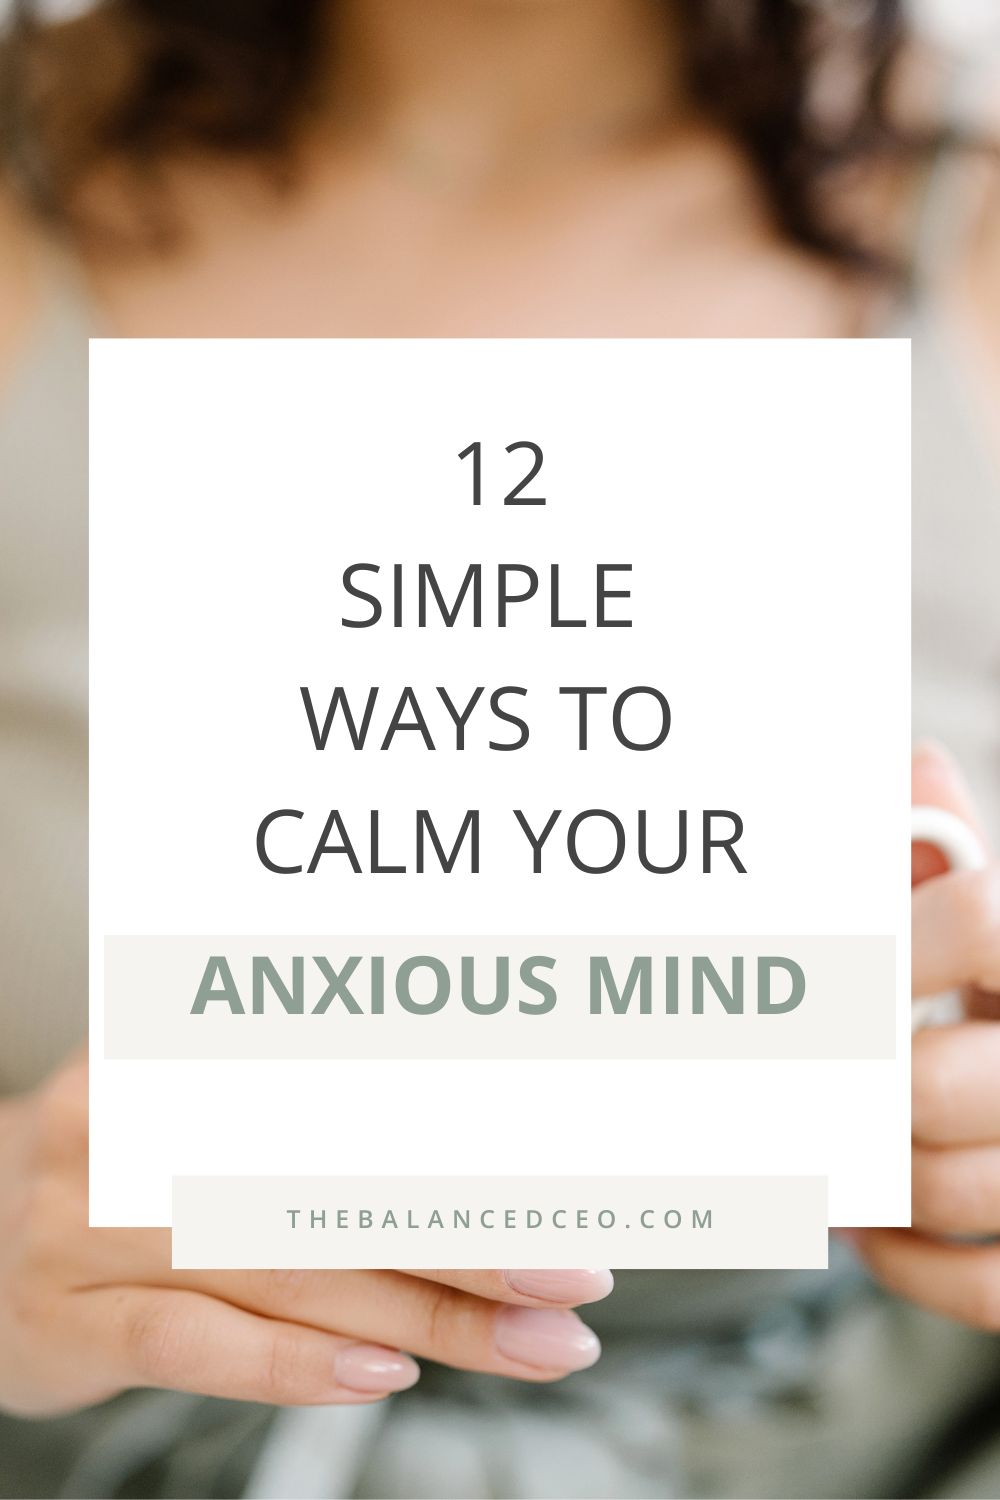 12 Simple Ways to Calm Your Anxious Mind